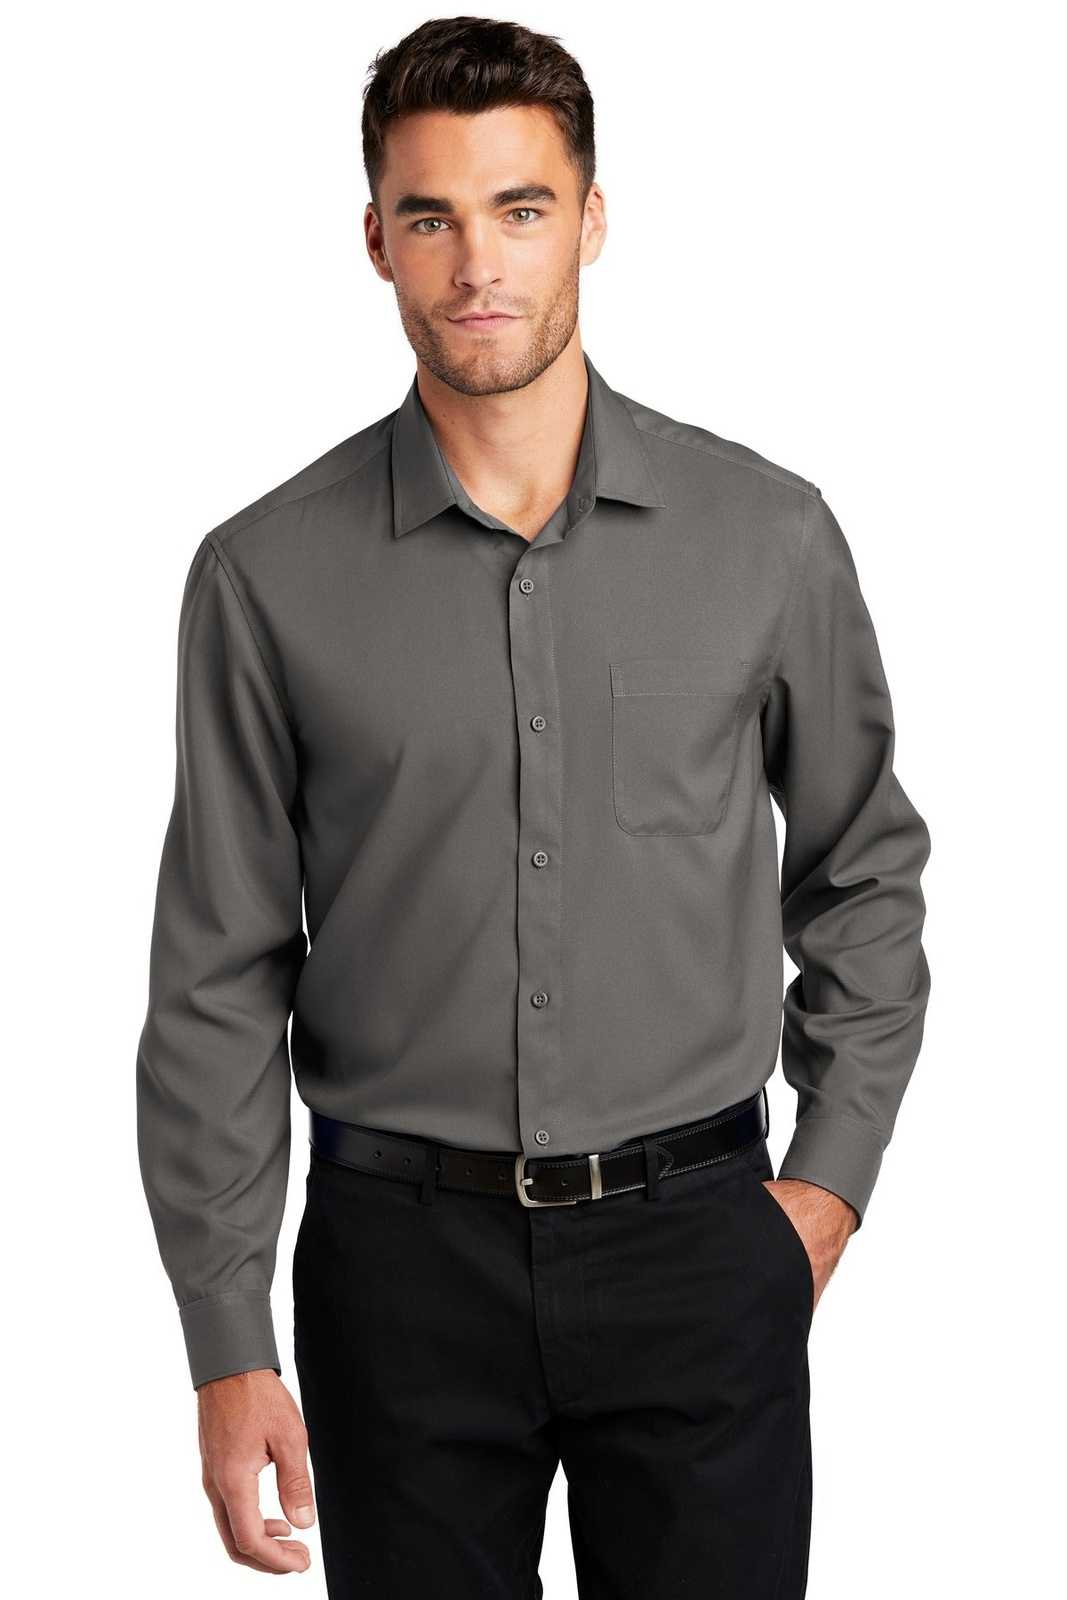 Port Authority W401 Long Sleeve Performance Staff Shirt - Graphite - HIT a Double - 1